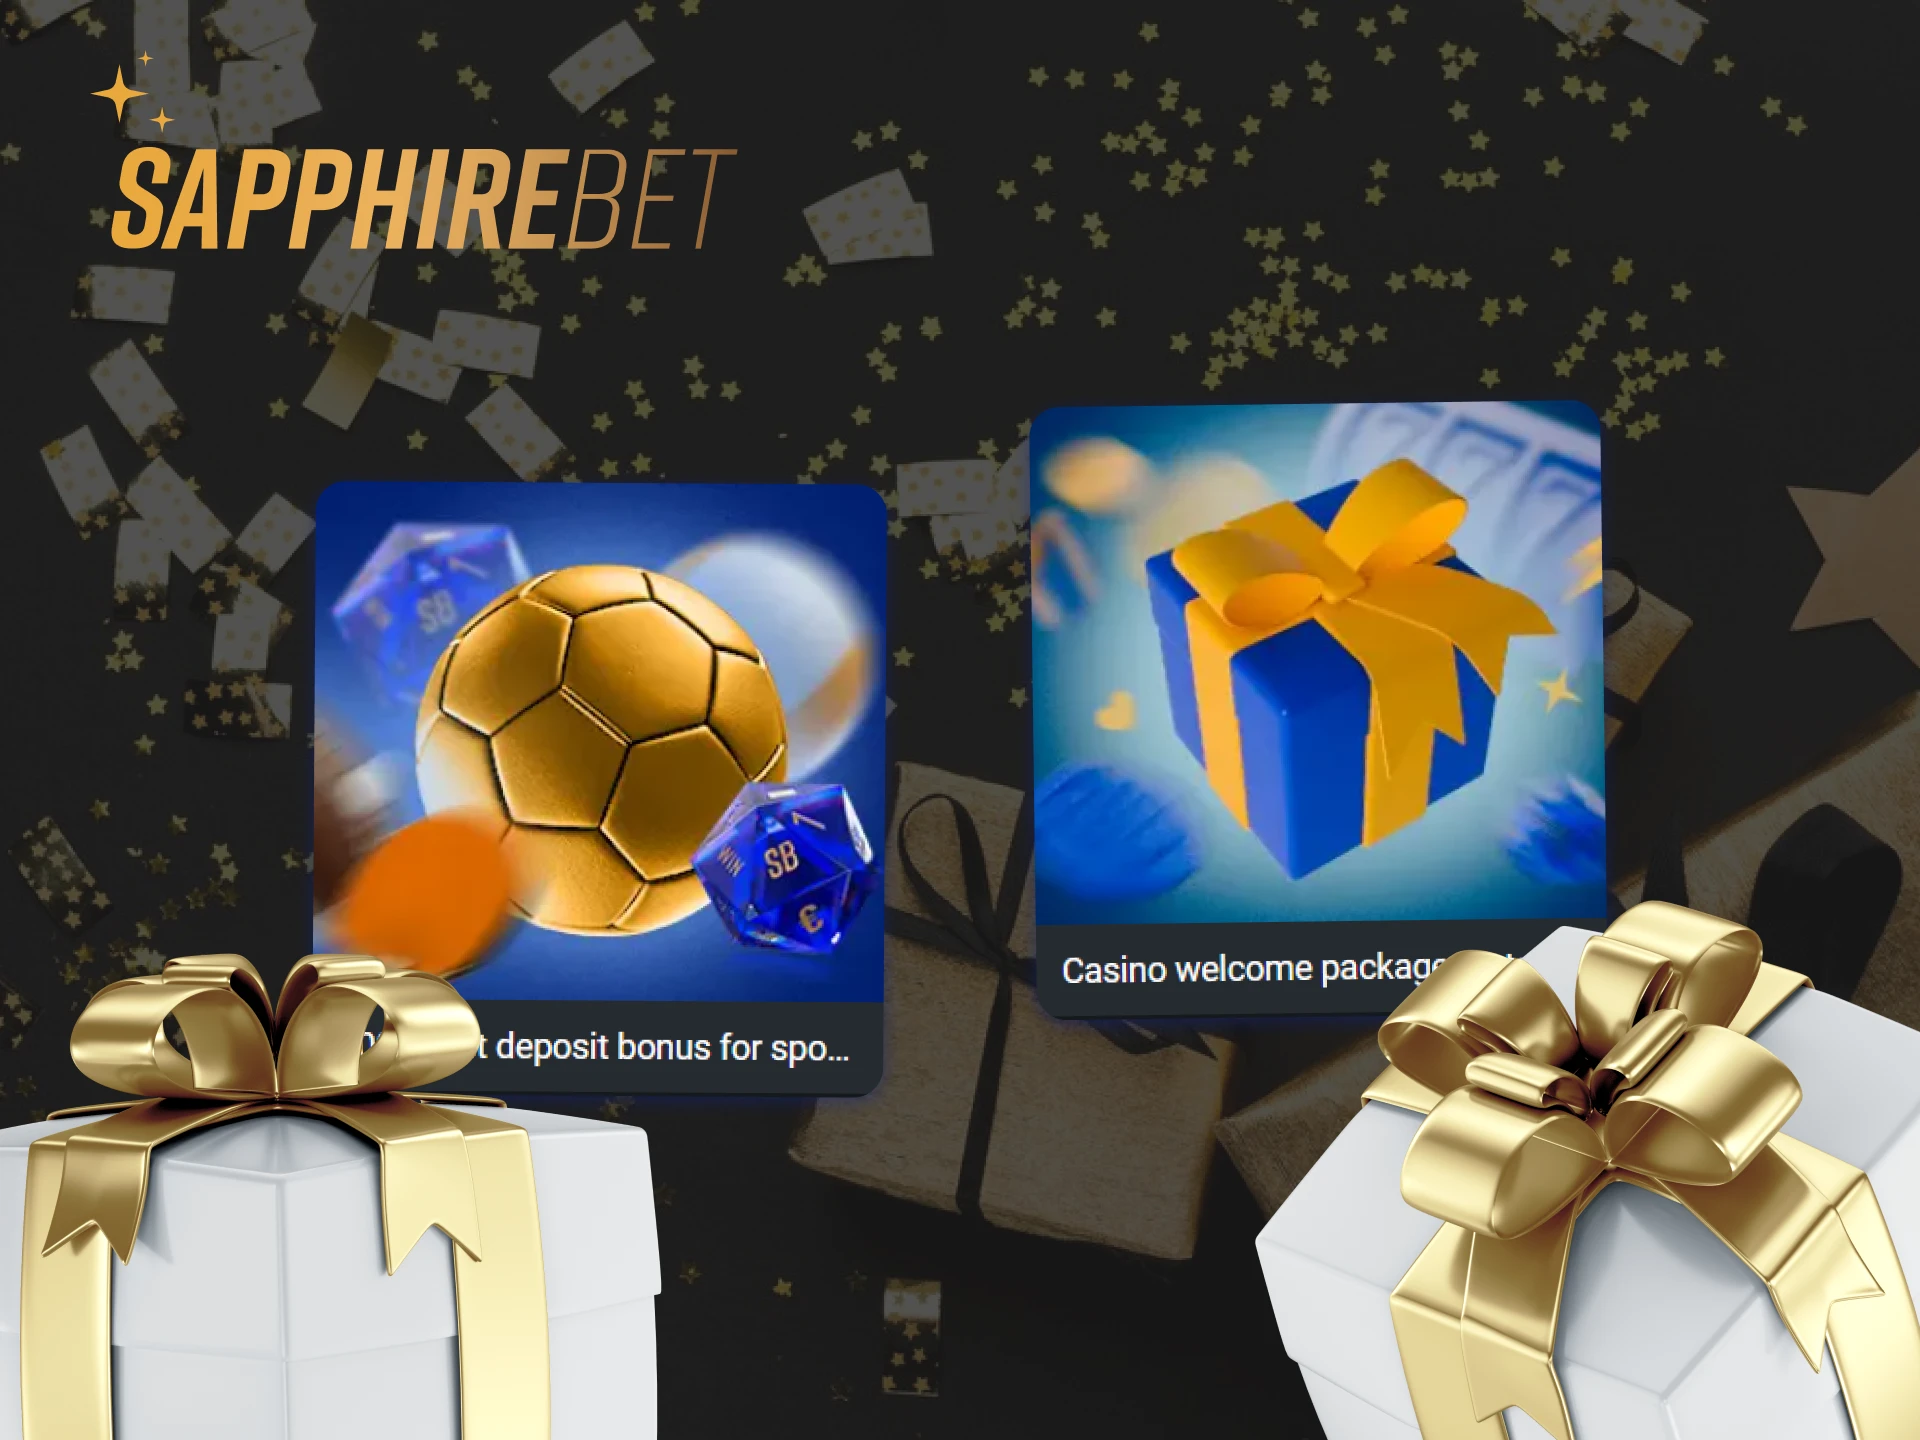 After registering with Sapphirebet, you can receive a sports or casino welcome bonus.